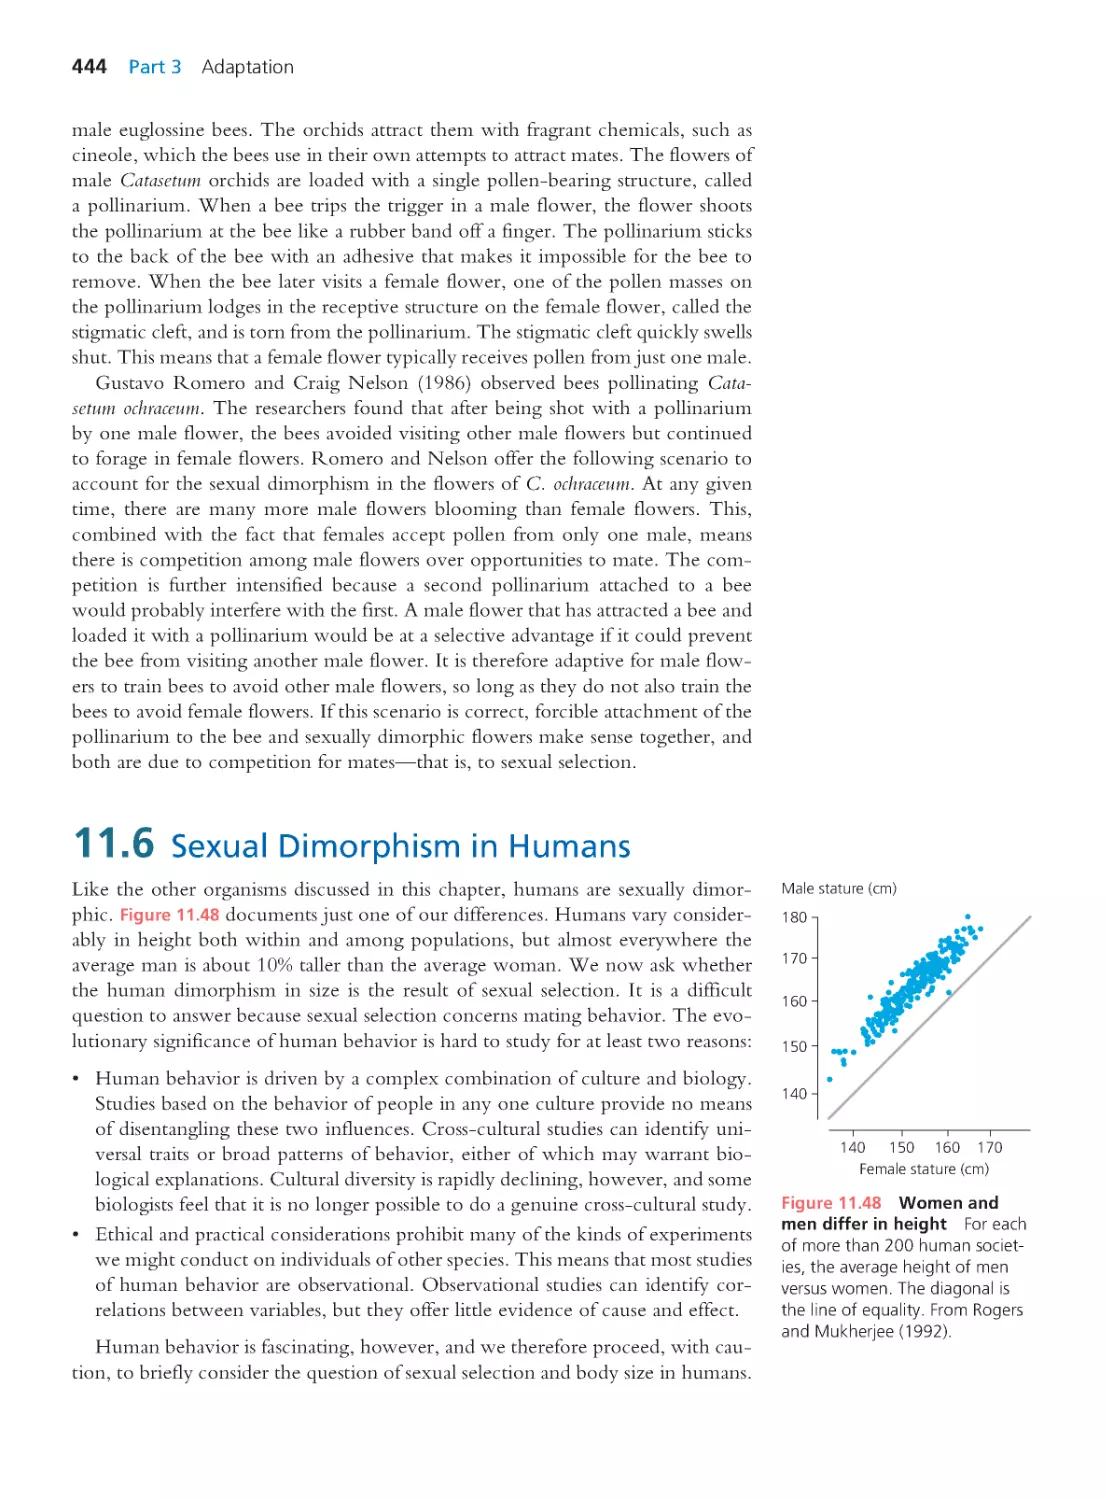 11.6 Sexual Dimorphism in Humans